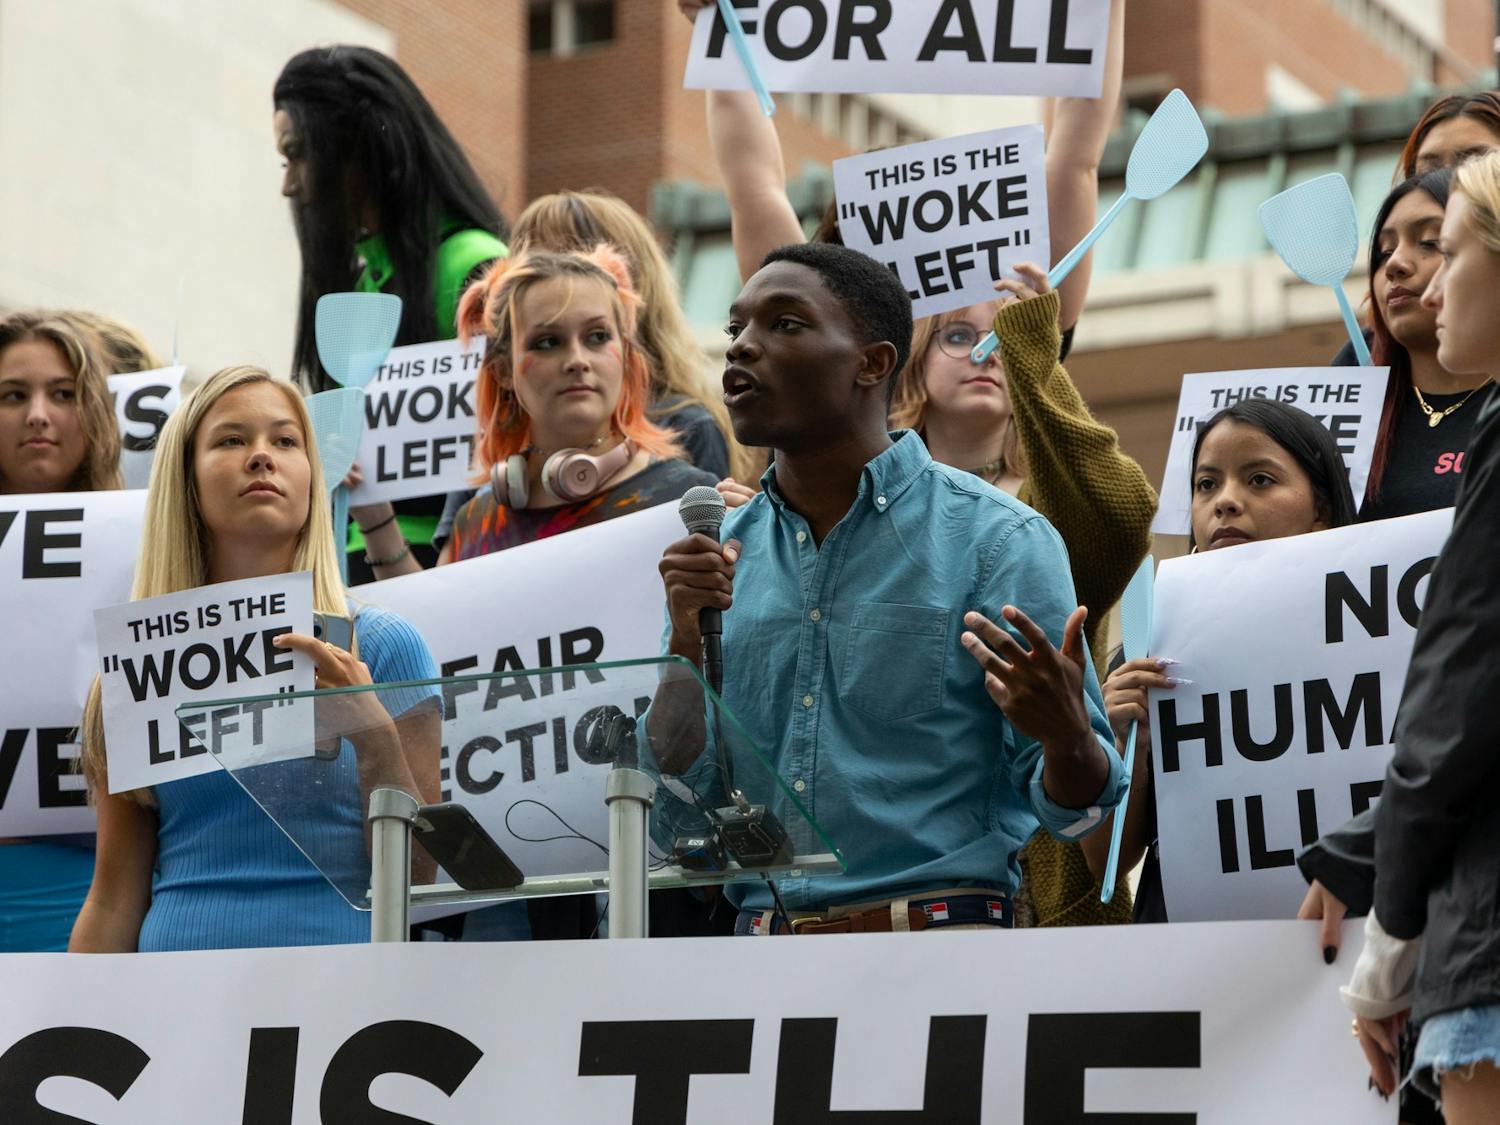 UNC Young Democrats’ president, T.J. White, speaks during a protest against the visitation of former Vice President Mike Pence in the Pit on April 26, 2023, in Chapel Hill, N.C.